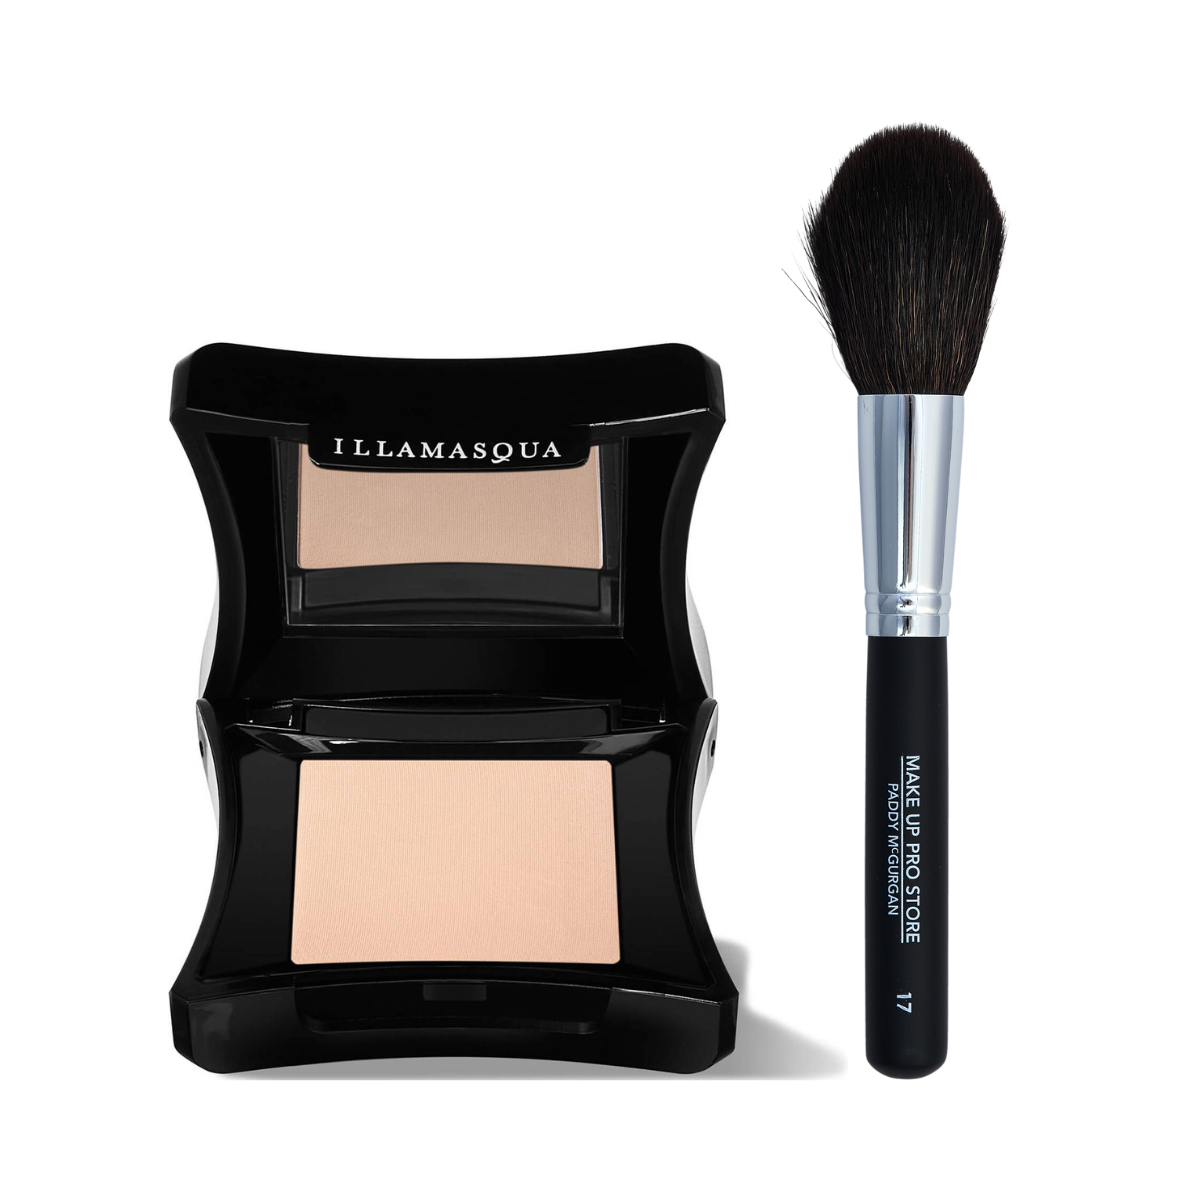 How to Clean Your Makeup Brushes - Illamasqua